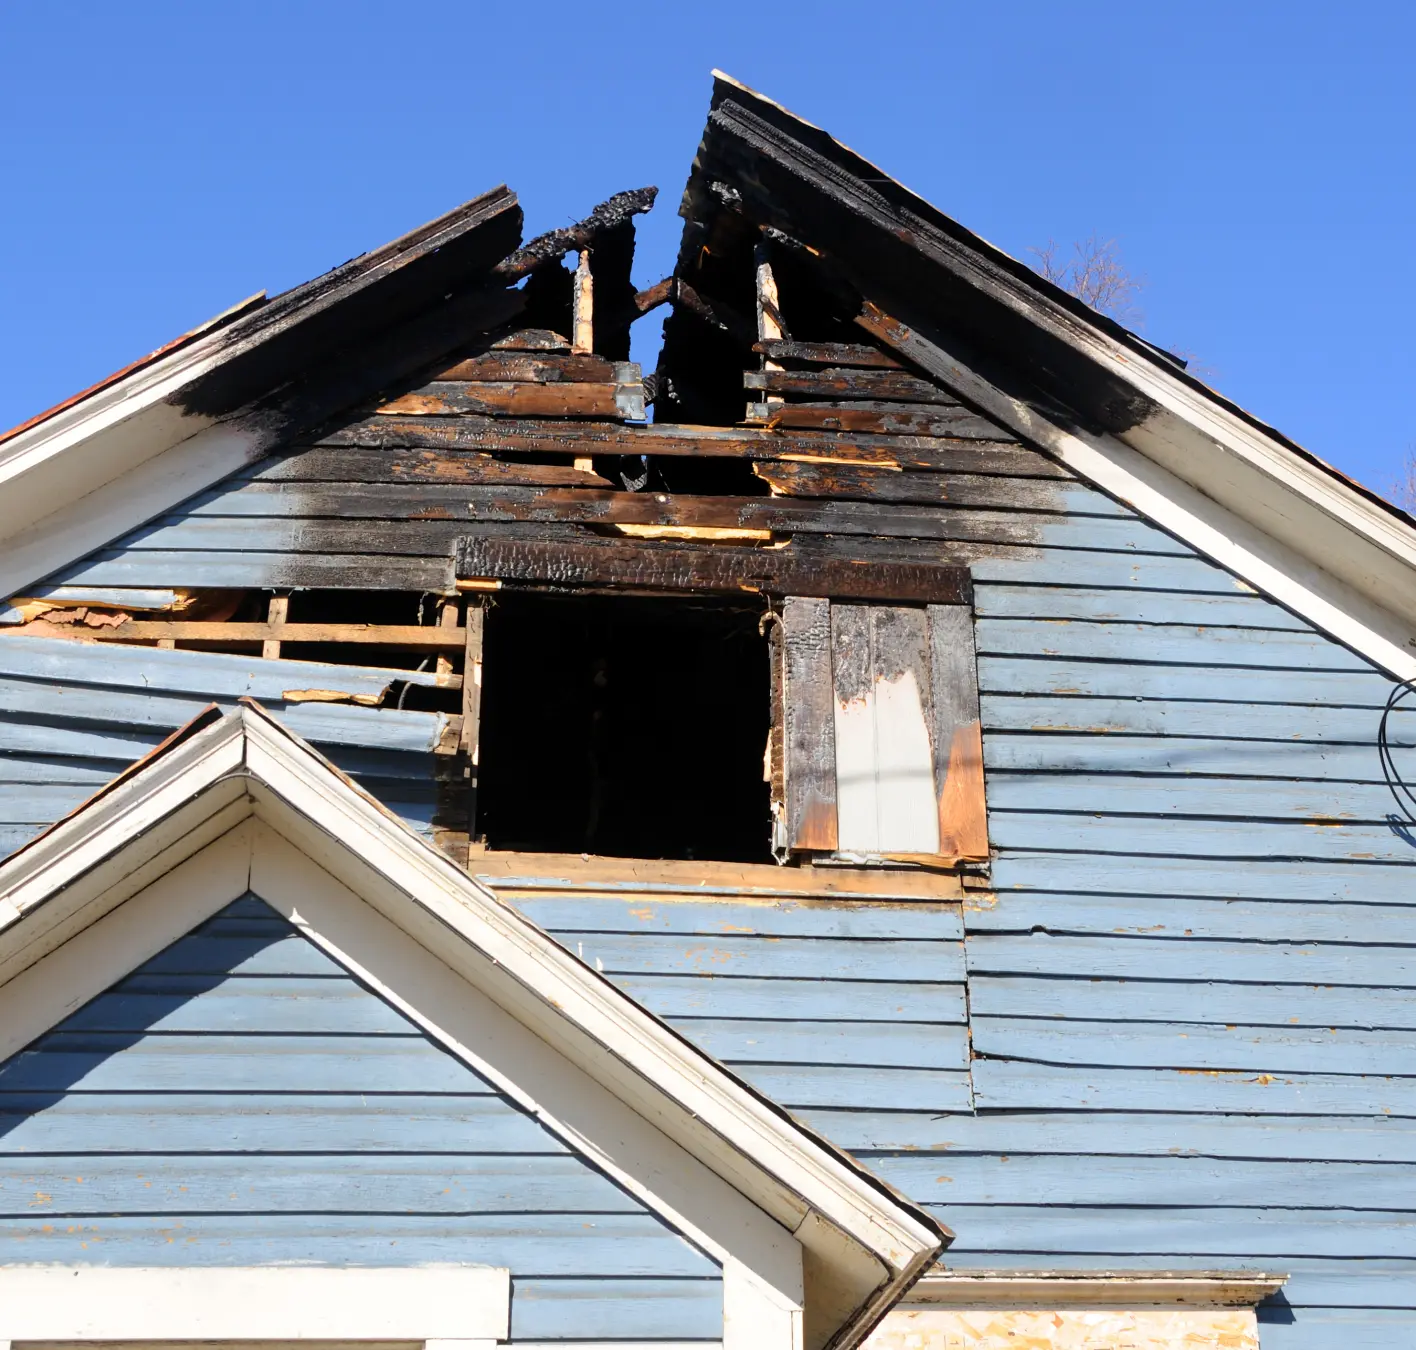 residential fire damage claim